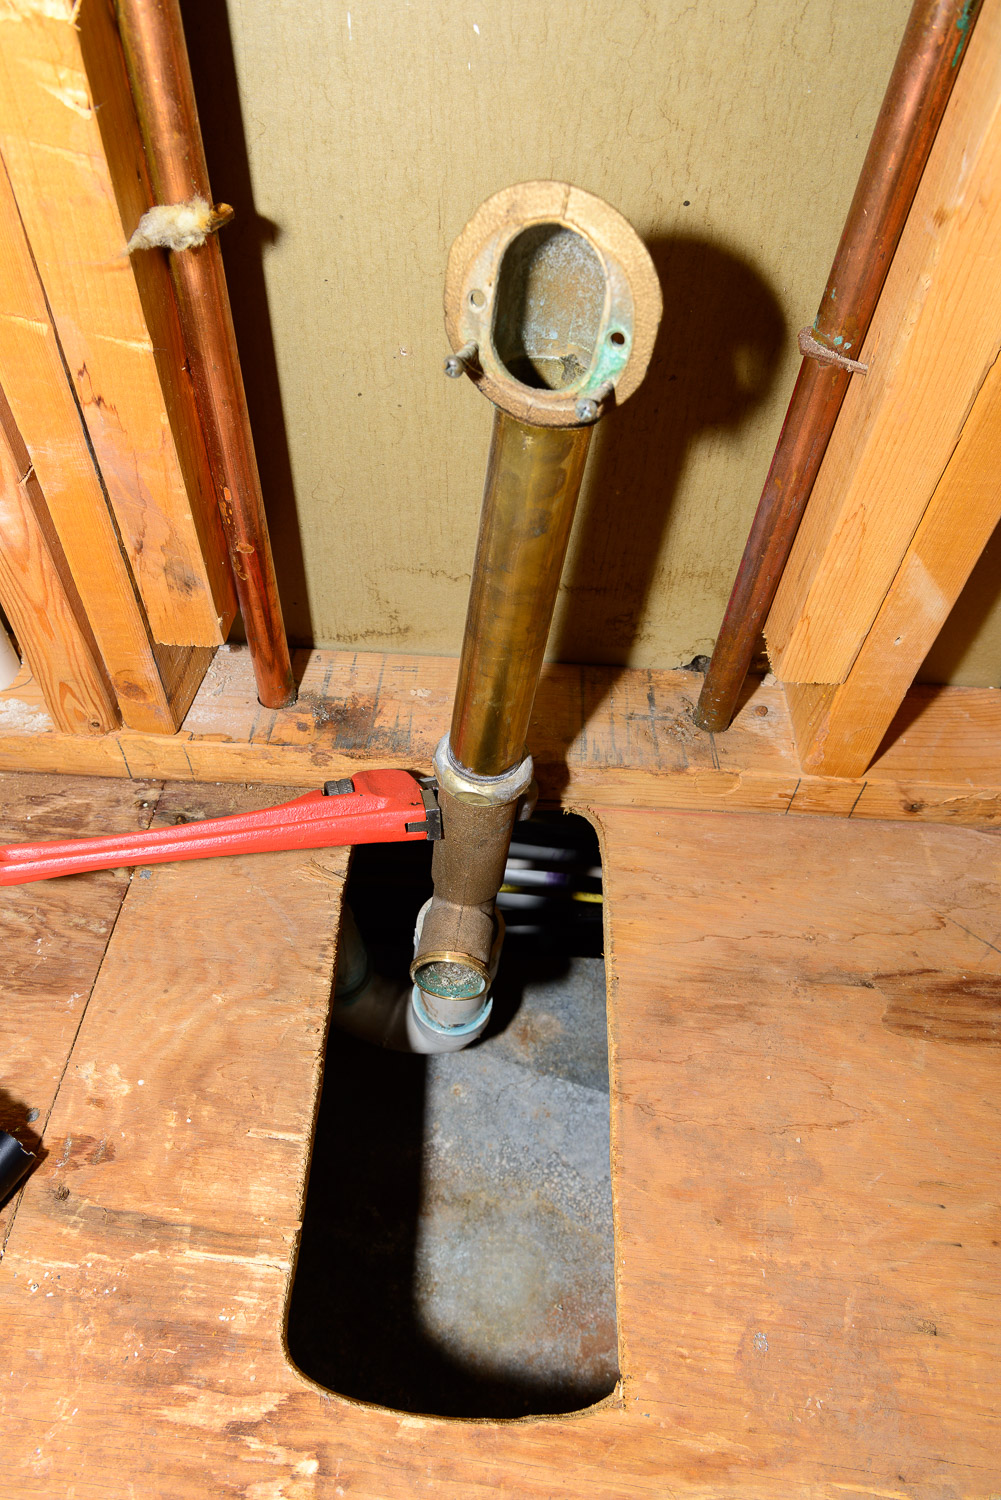 Using a pipe wrench to unscrew the threaded PVC fitting on the P trap